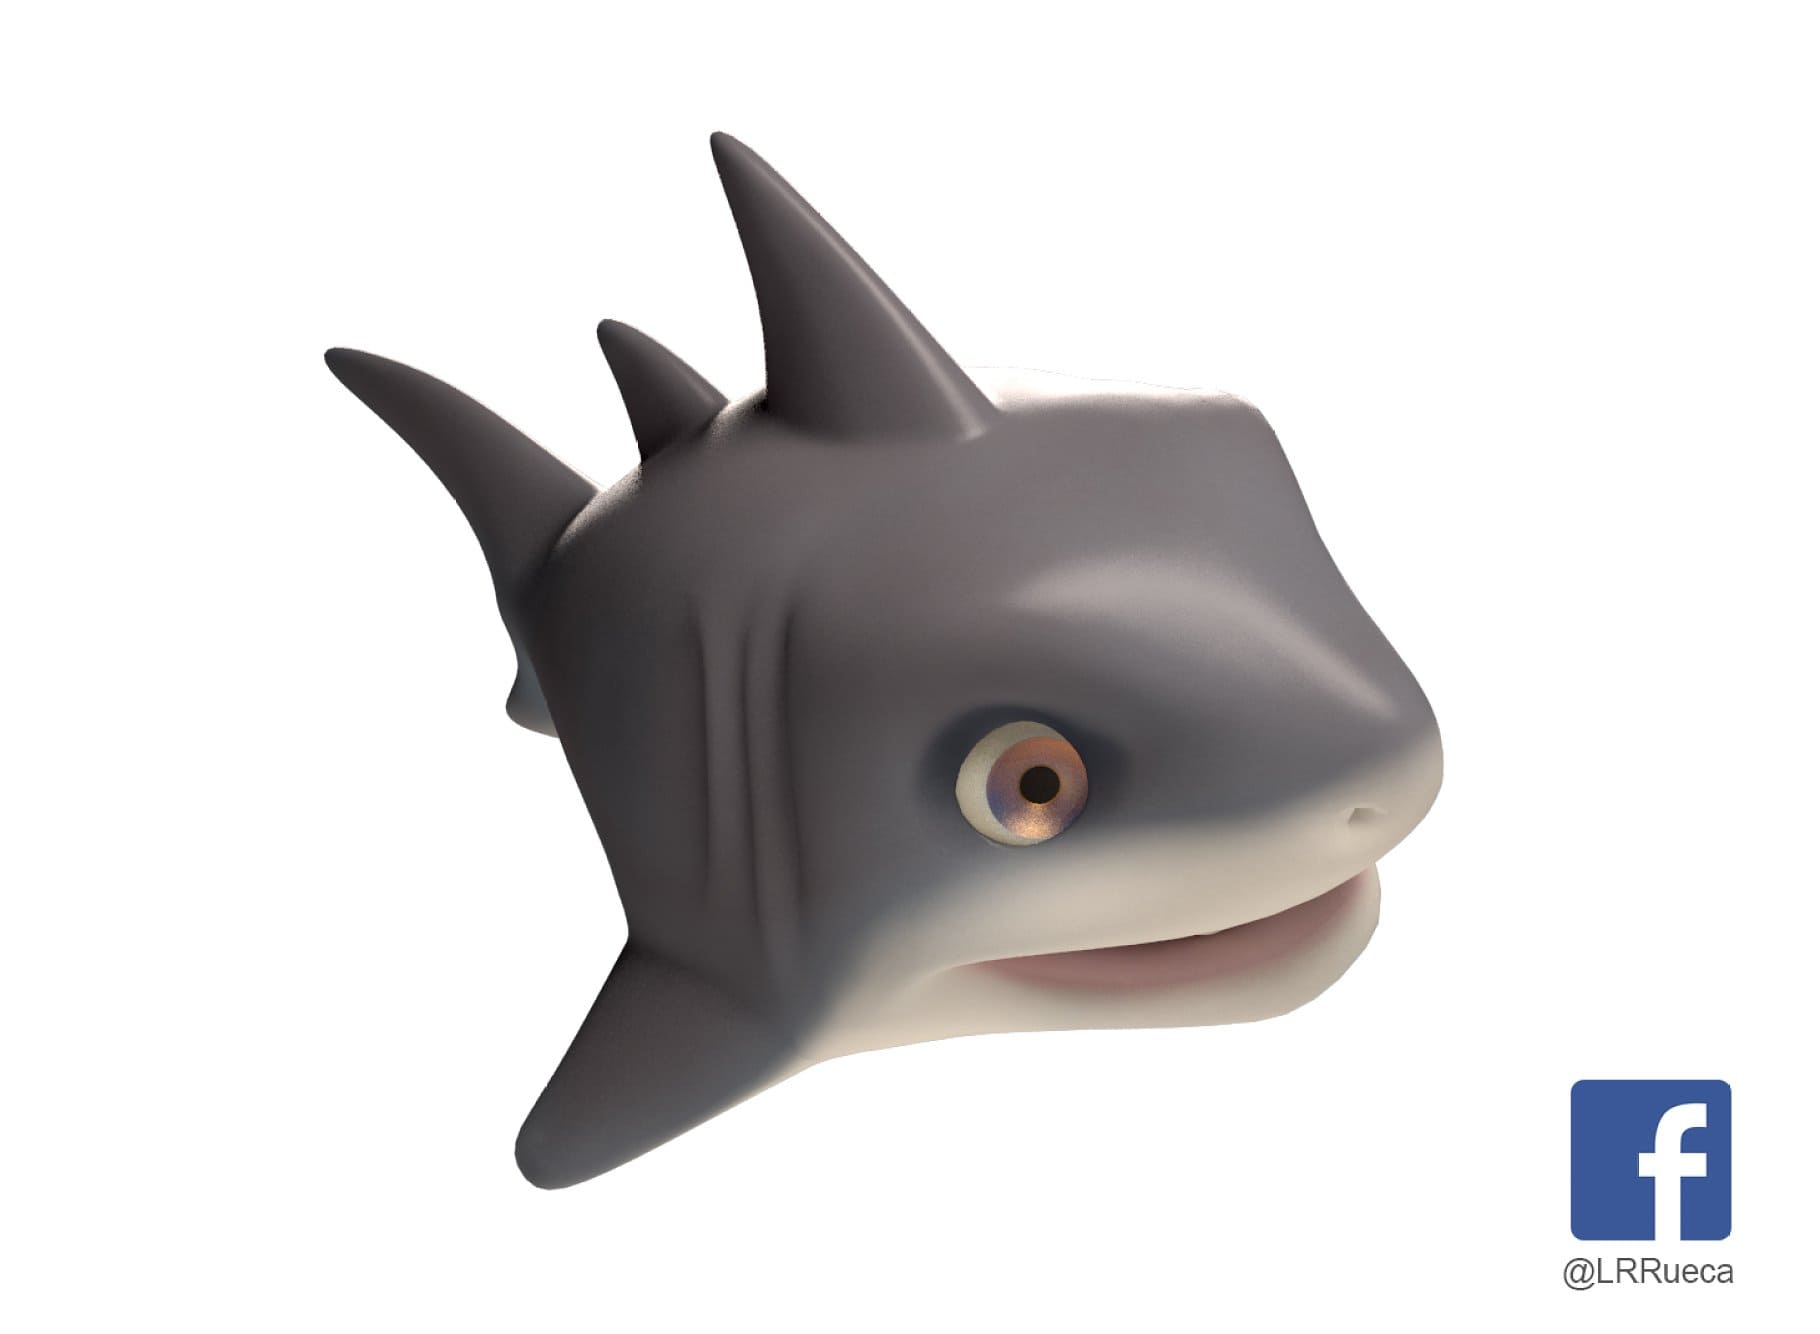 The upper right side of a stylized shark is drawn.